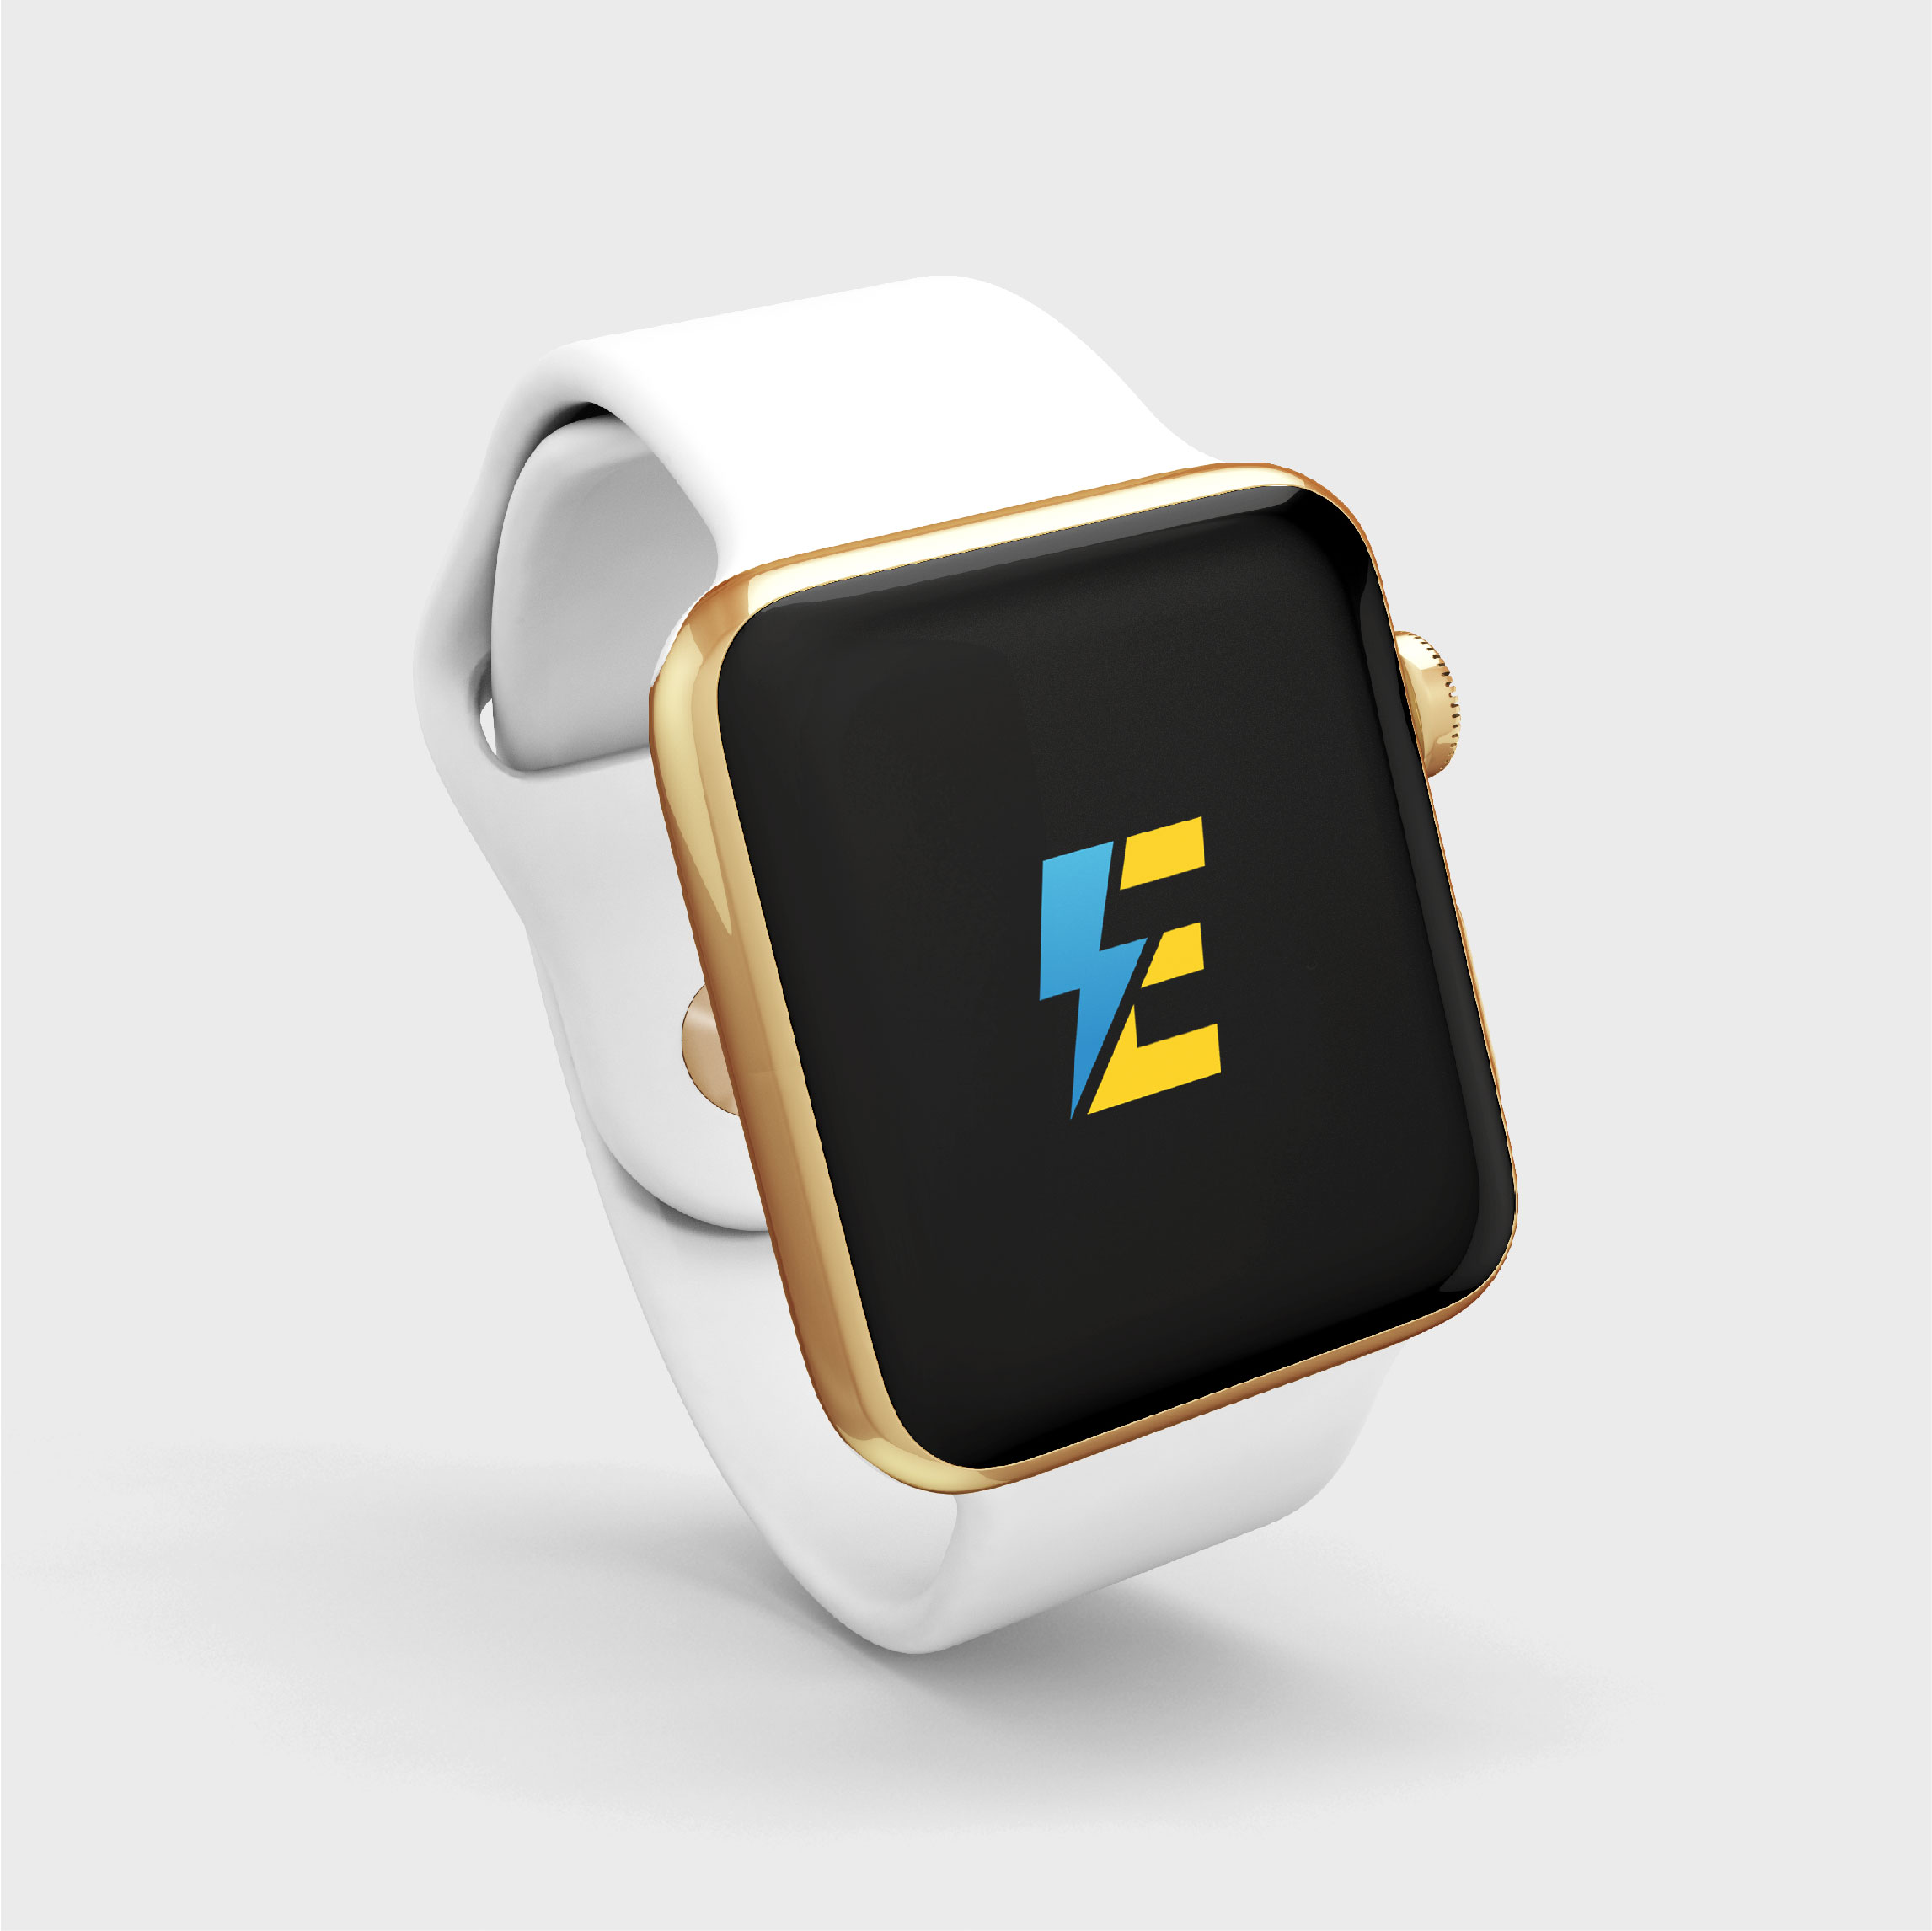 Smart watch with a logo on it.